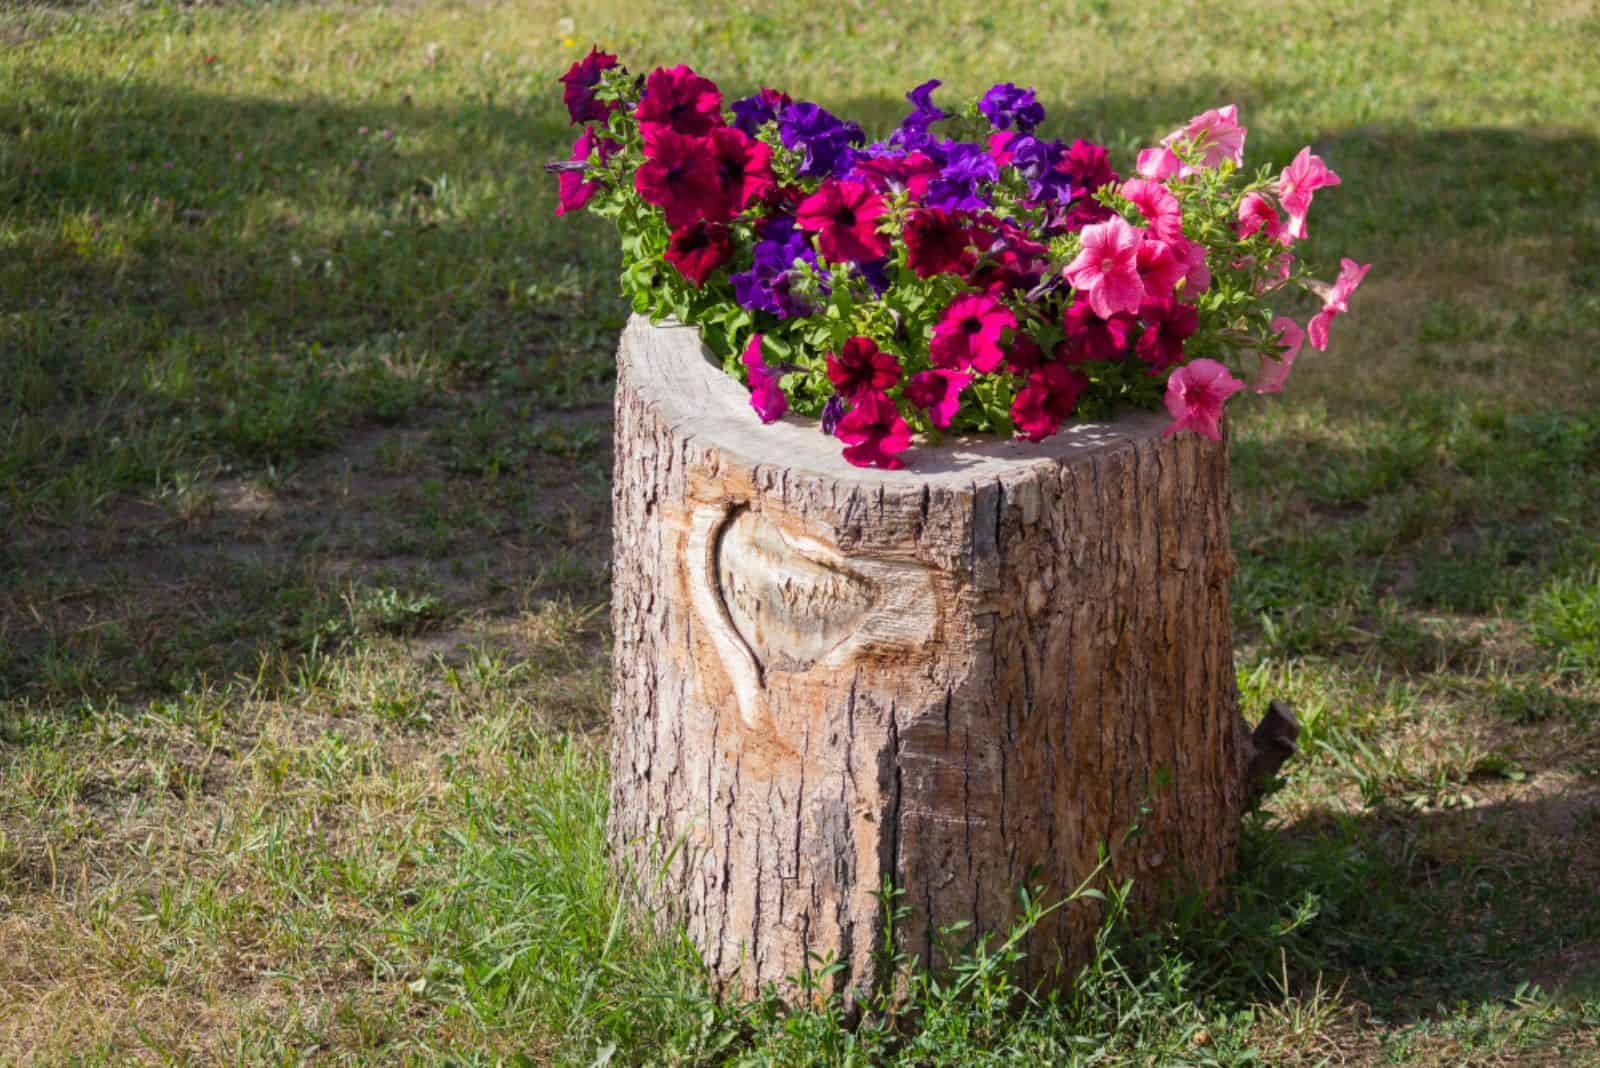 Flower flowerbed in the form of an old stump